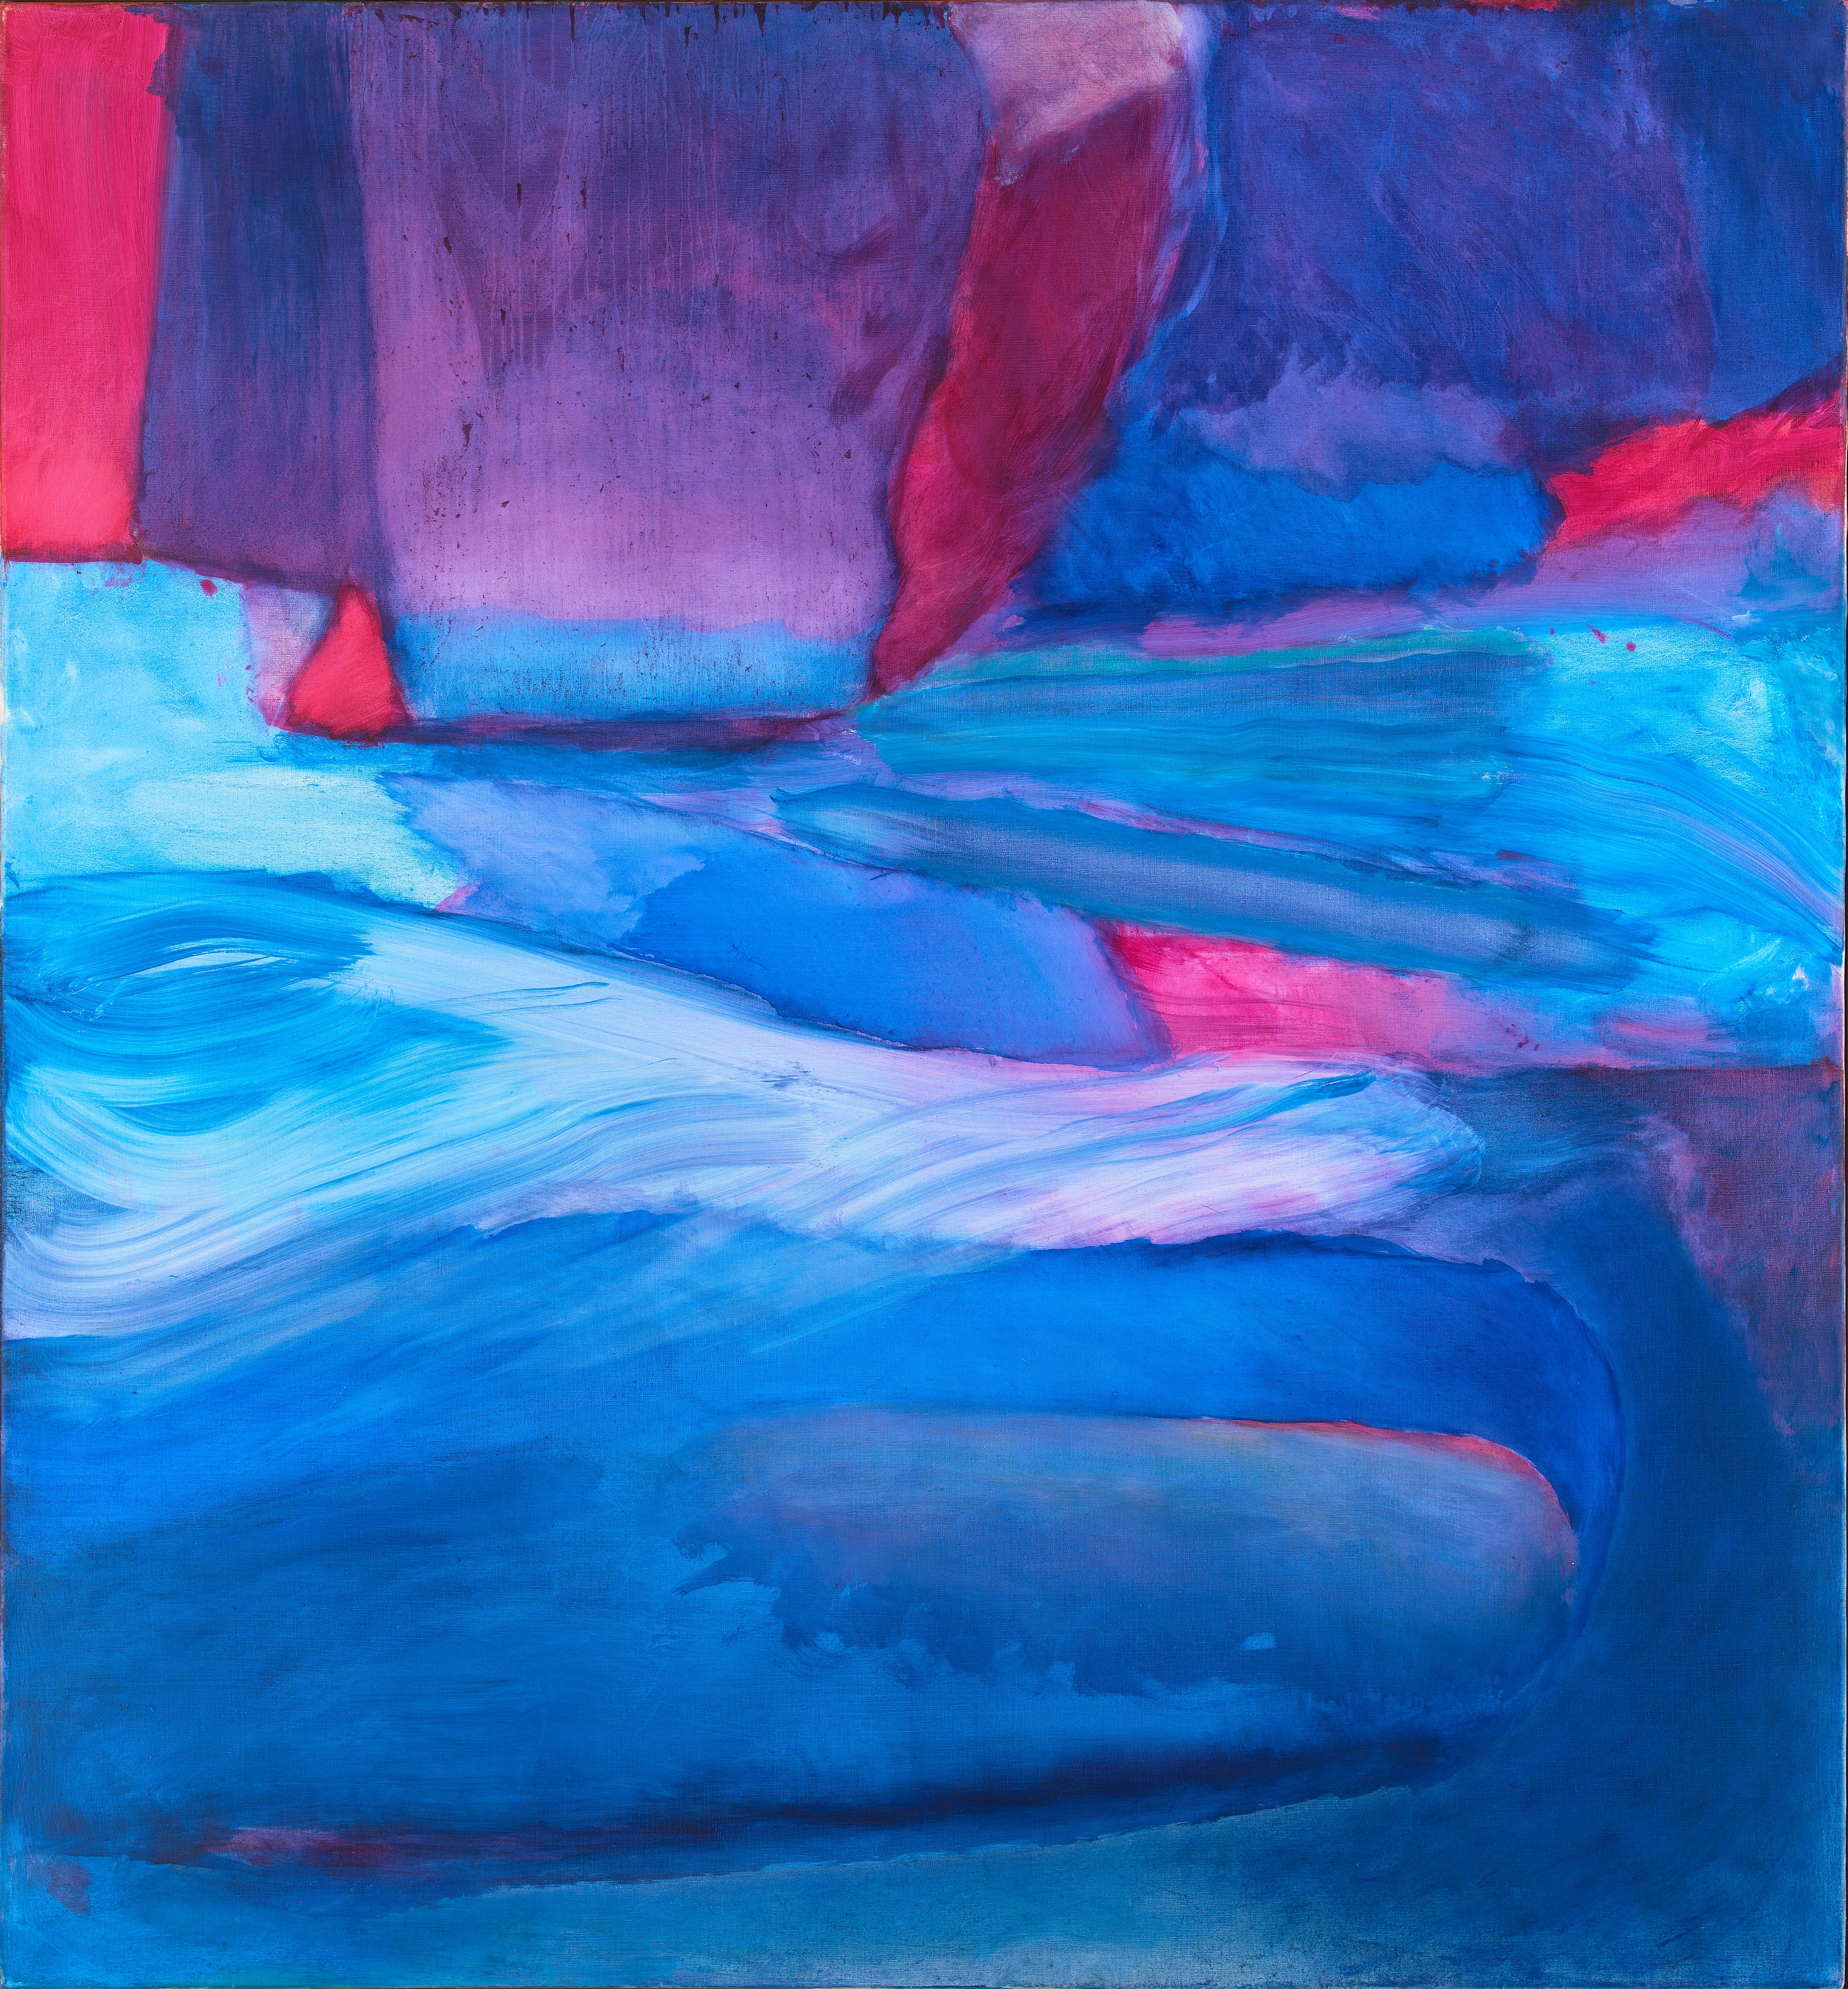 Abstract oil painting with dark blues at the bottom, swirls of light blue brushstrokes in the center, blending into magenta and purple patches of color at the top.